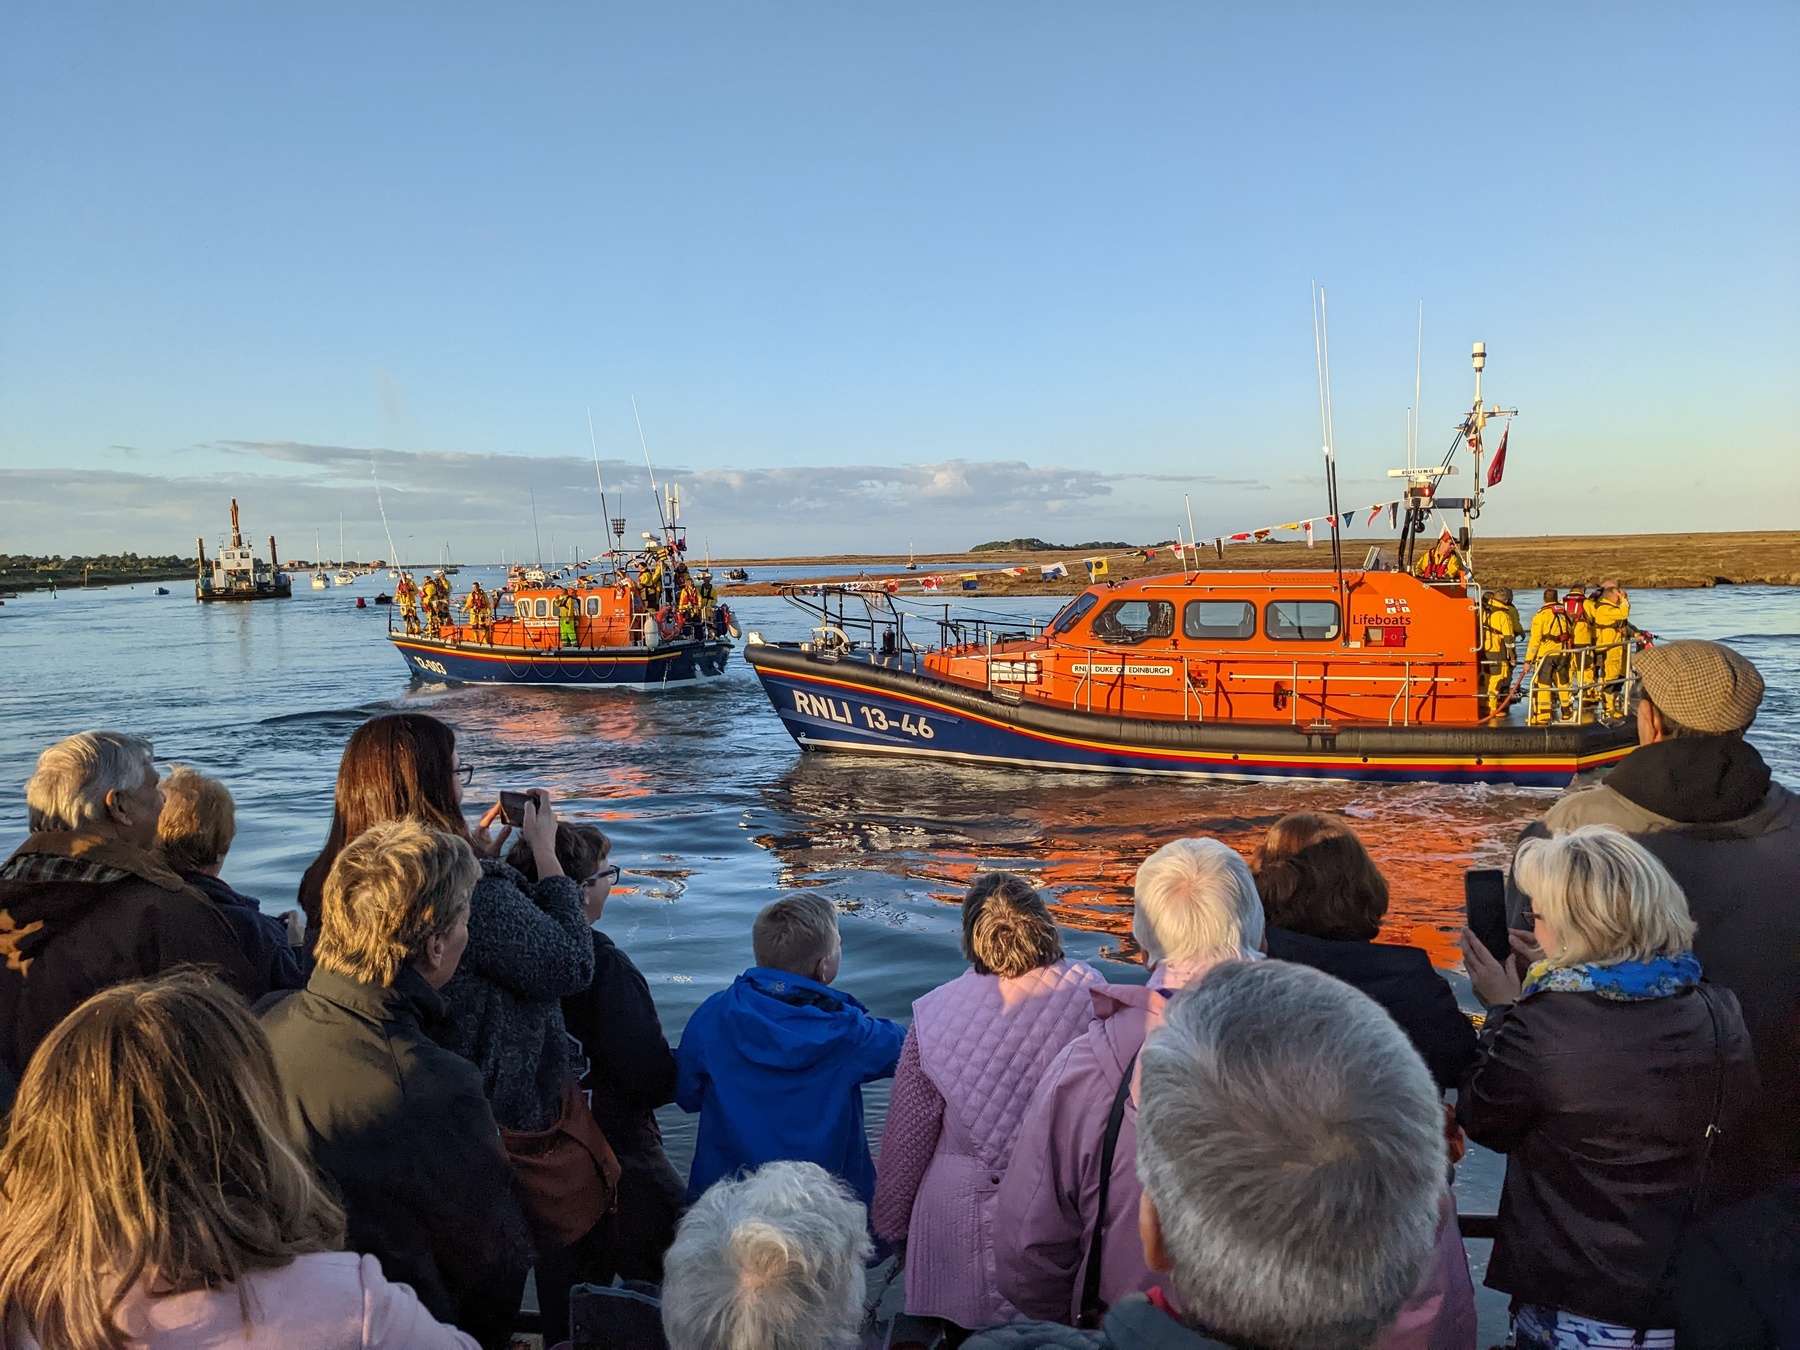 13-46 in the quay with the current Mersey class lifeboat